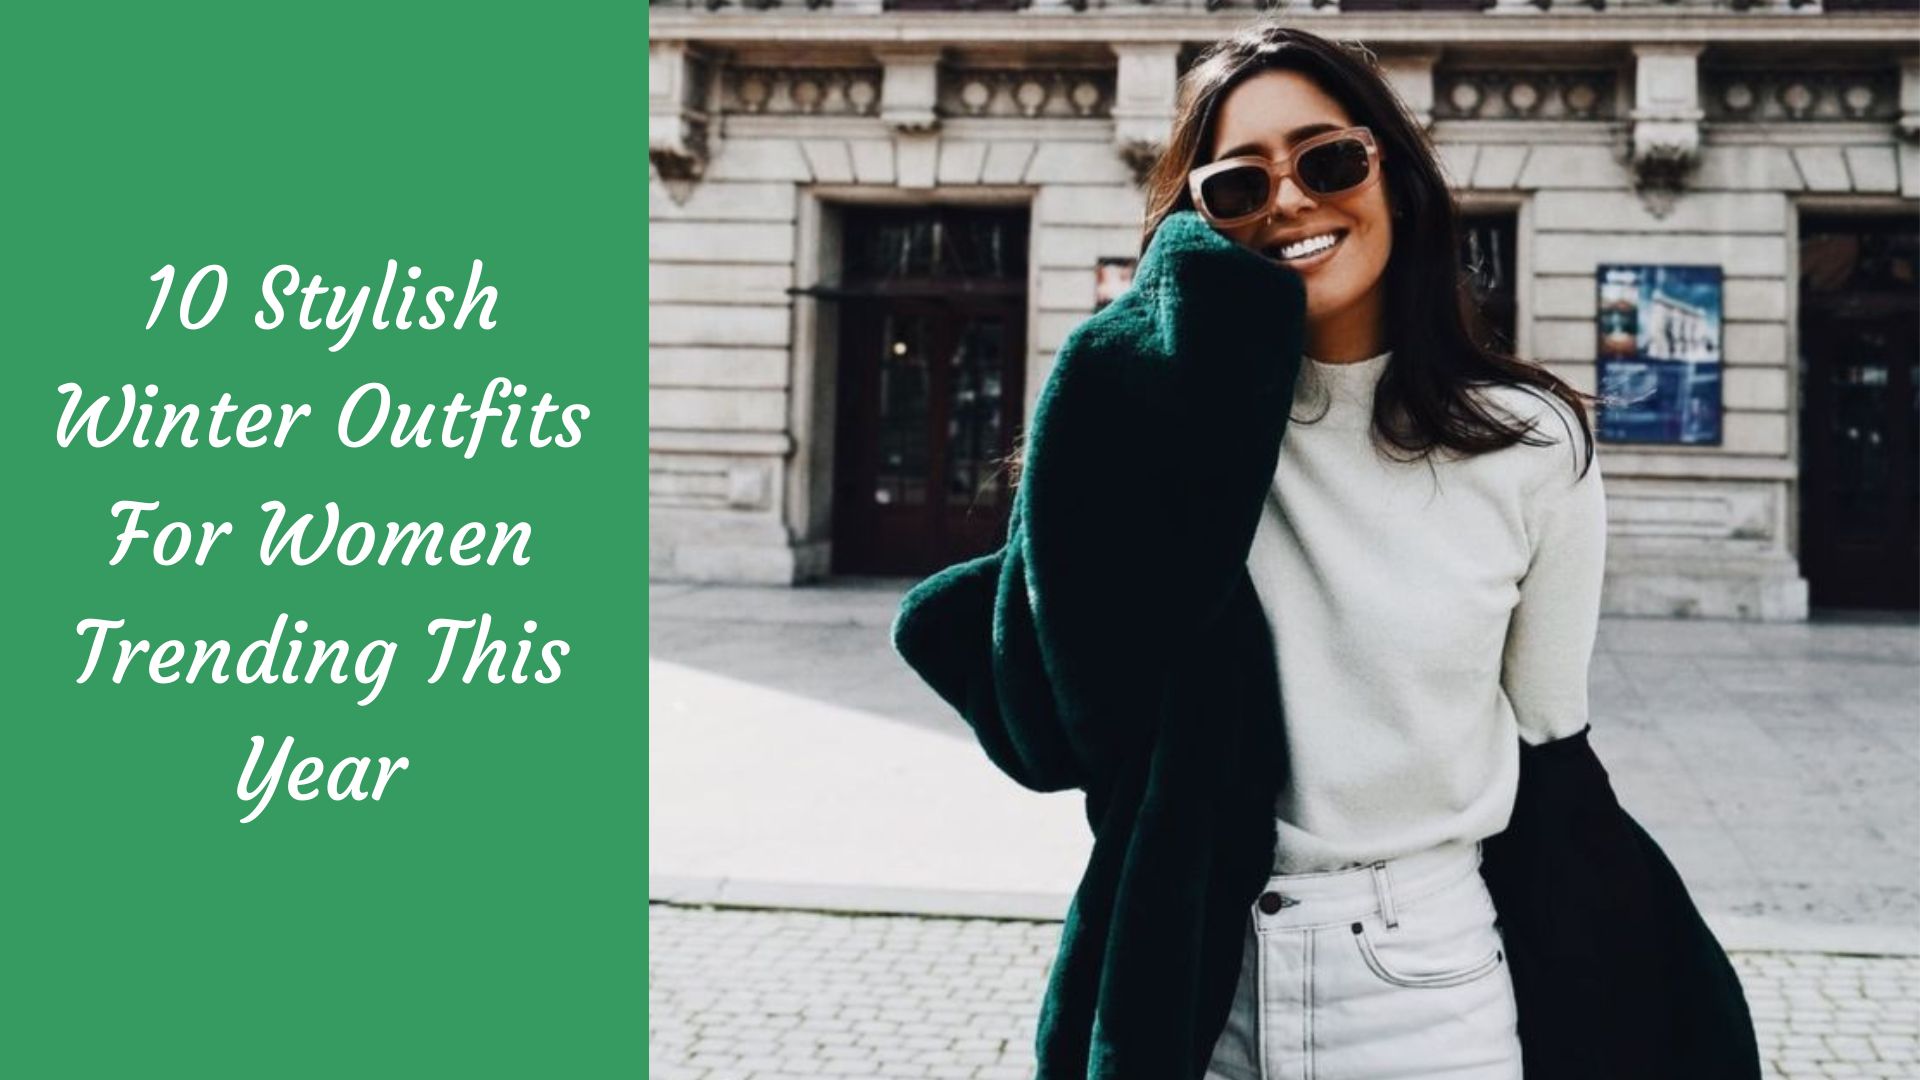 10 Stylish Winter Outfits For Women Trending This Year - The Kosha Journal